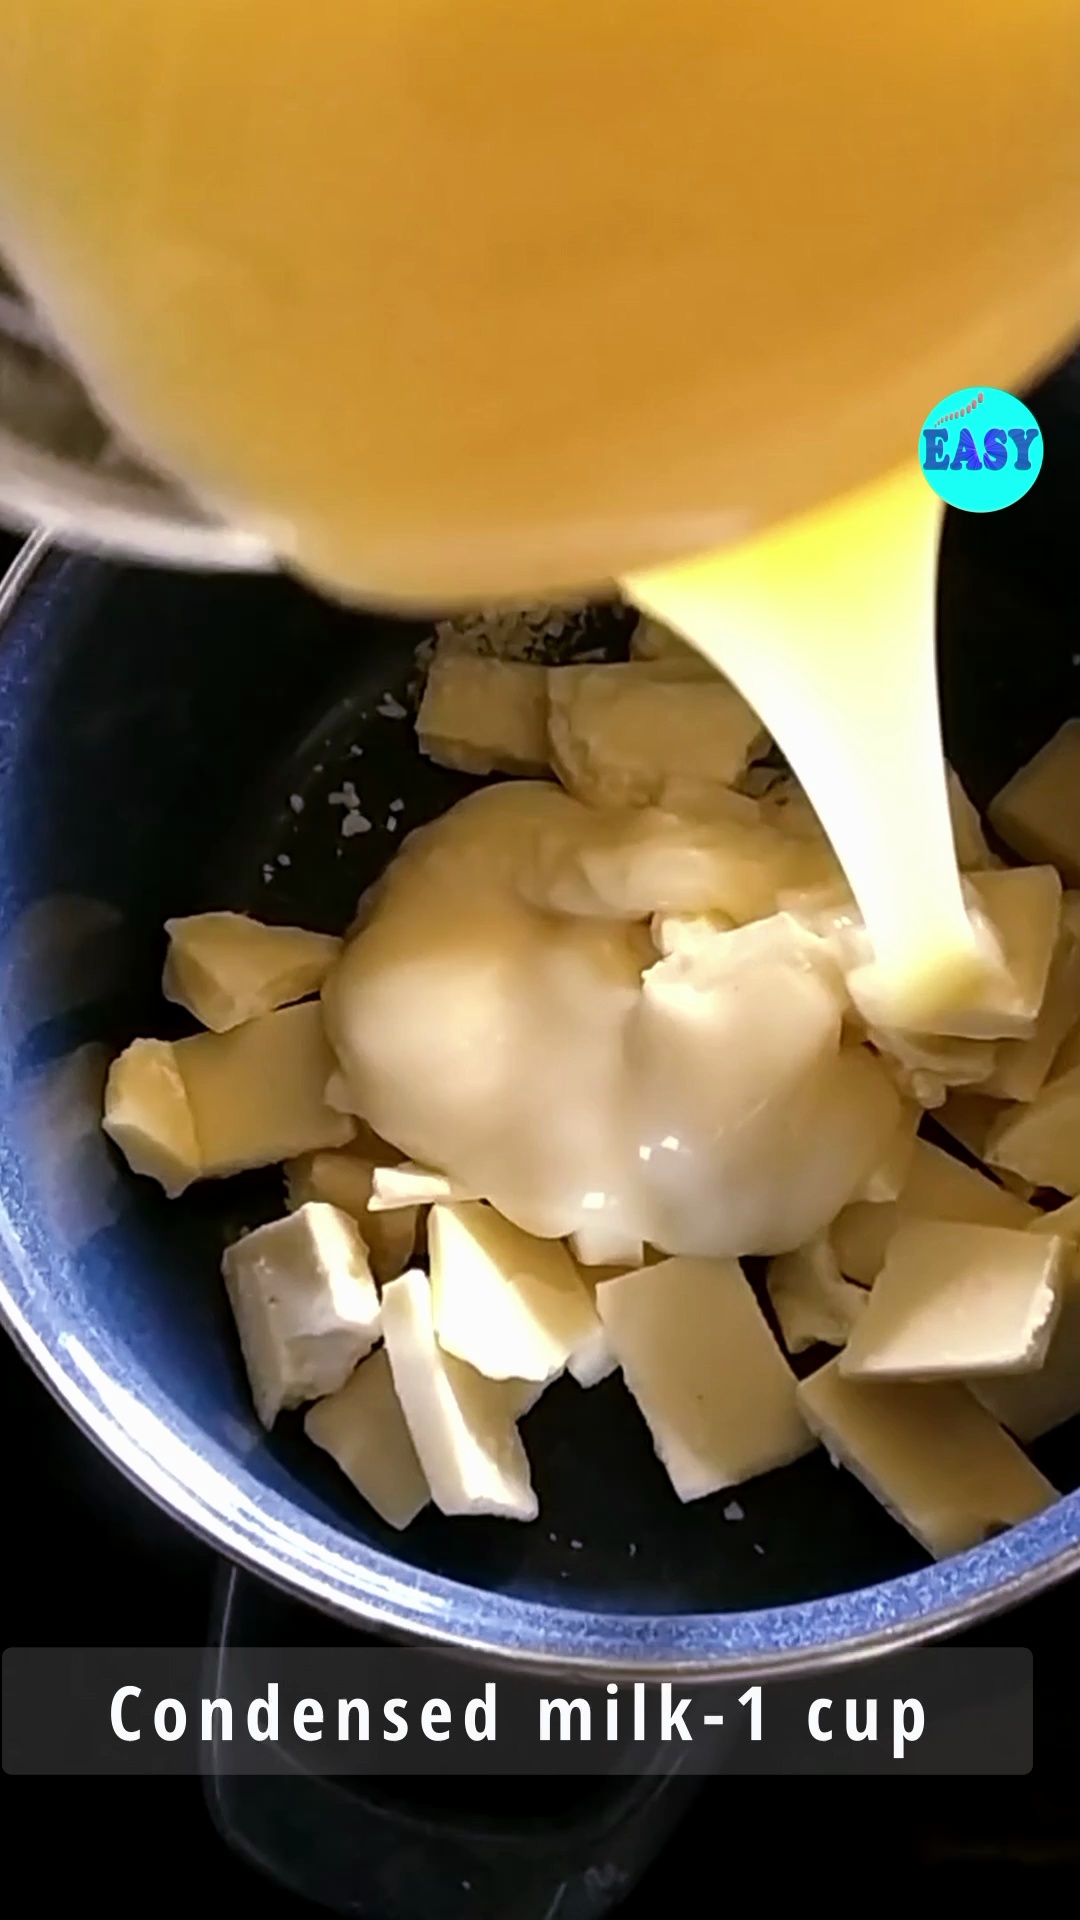 Step 1 - Add the chopped white chocolate, sweetened condensed milk and butter to a  saucepan and place over low heat. Stir continuously until the white chocolate is fully melted and the mixture is smooth.